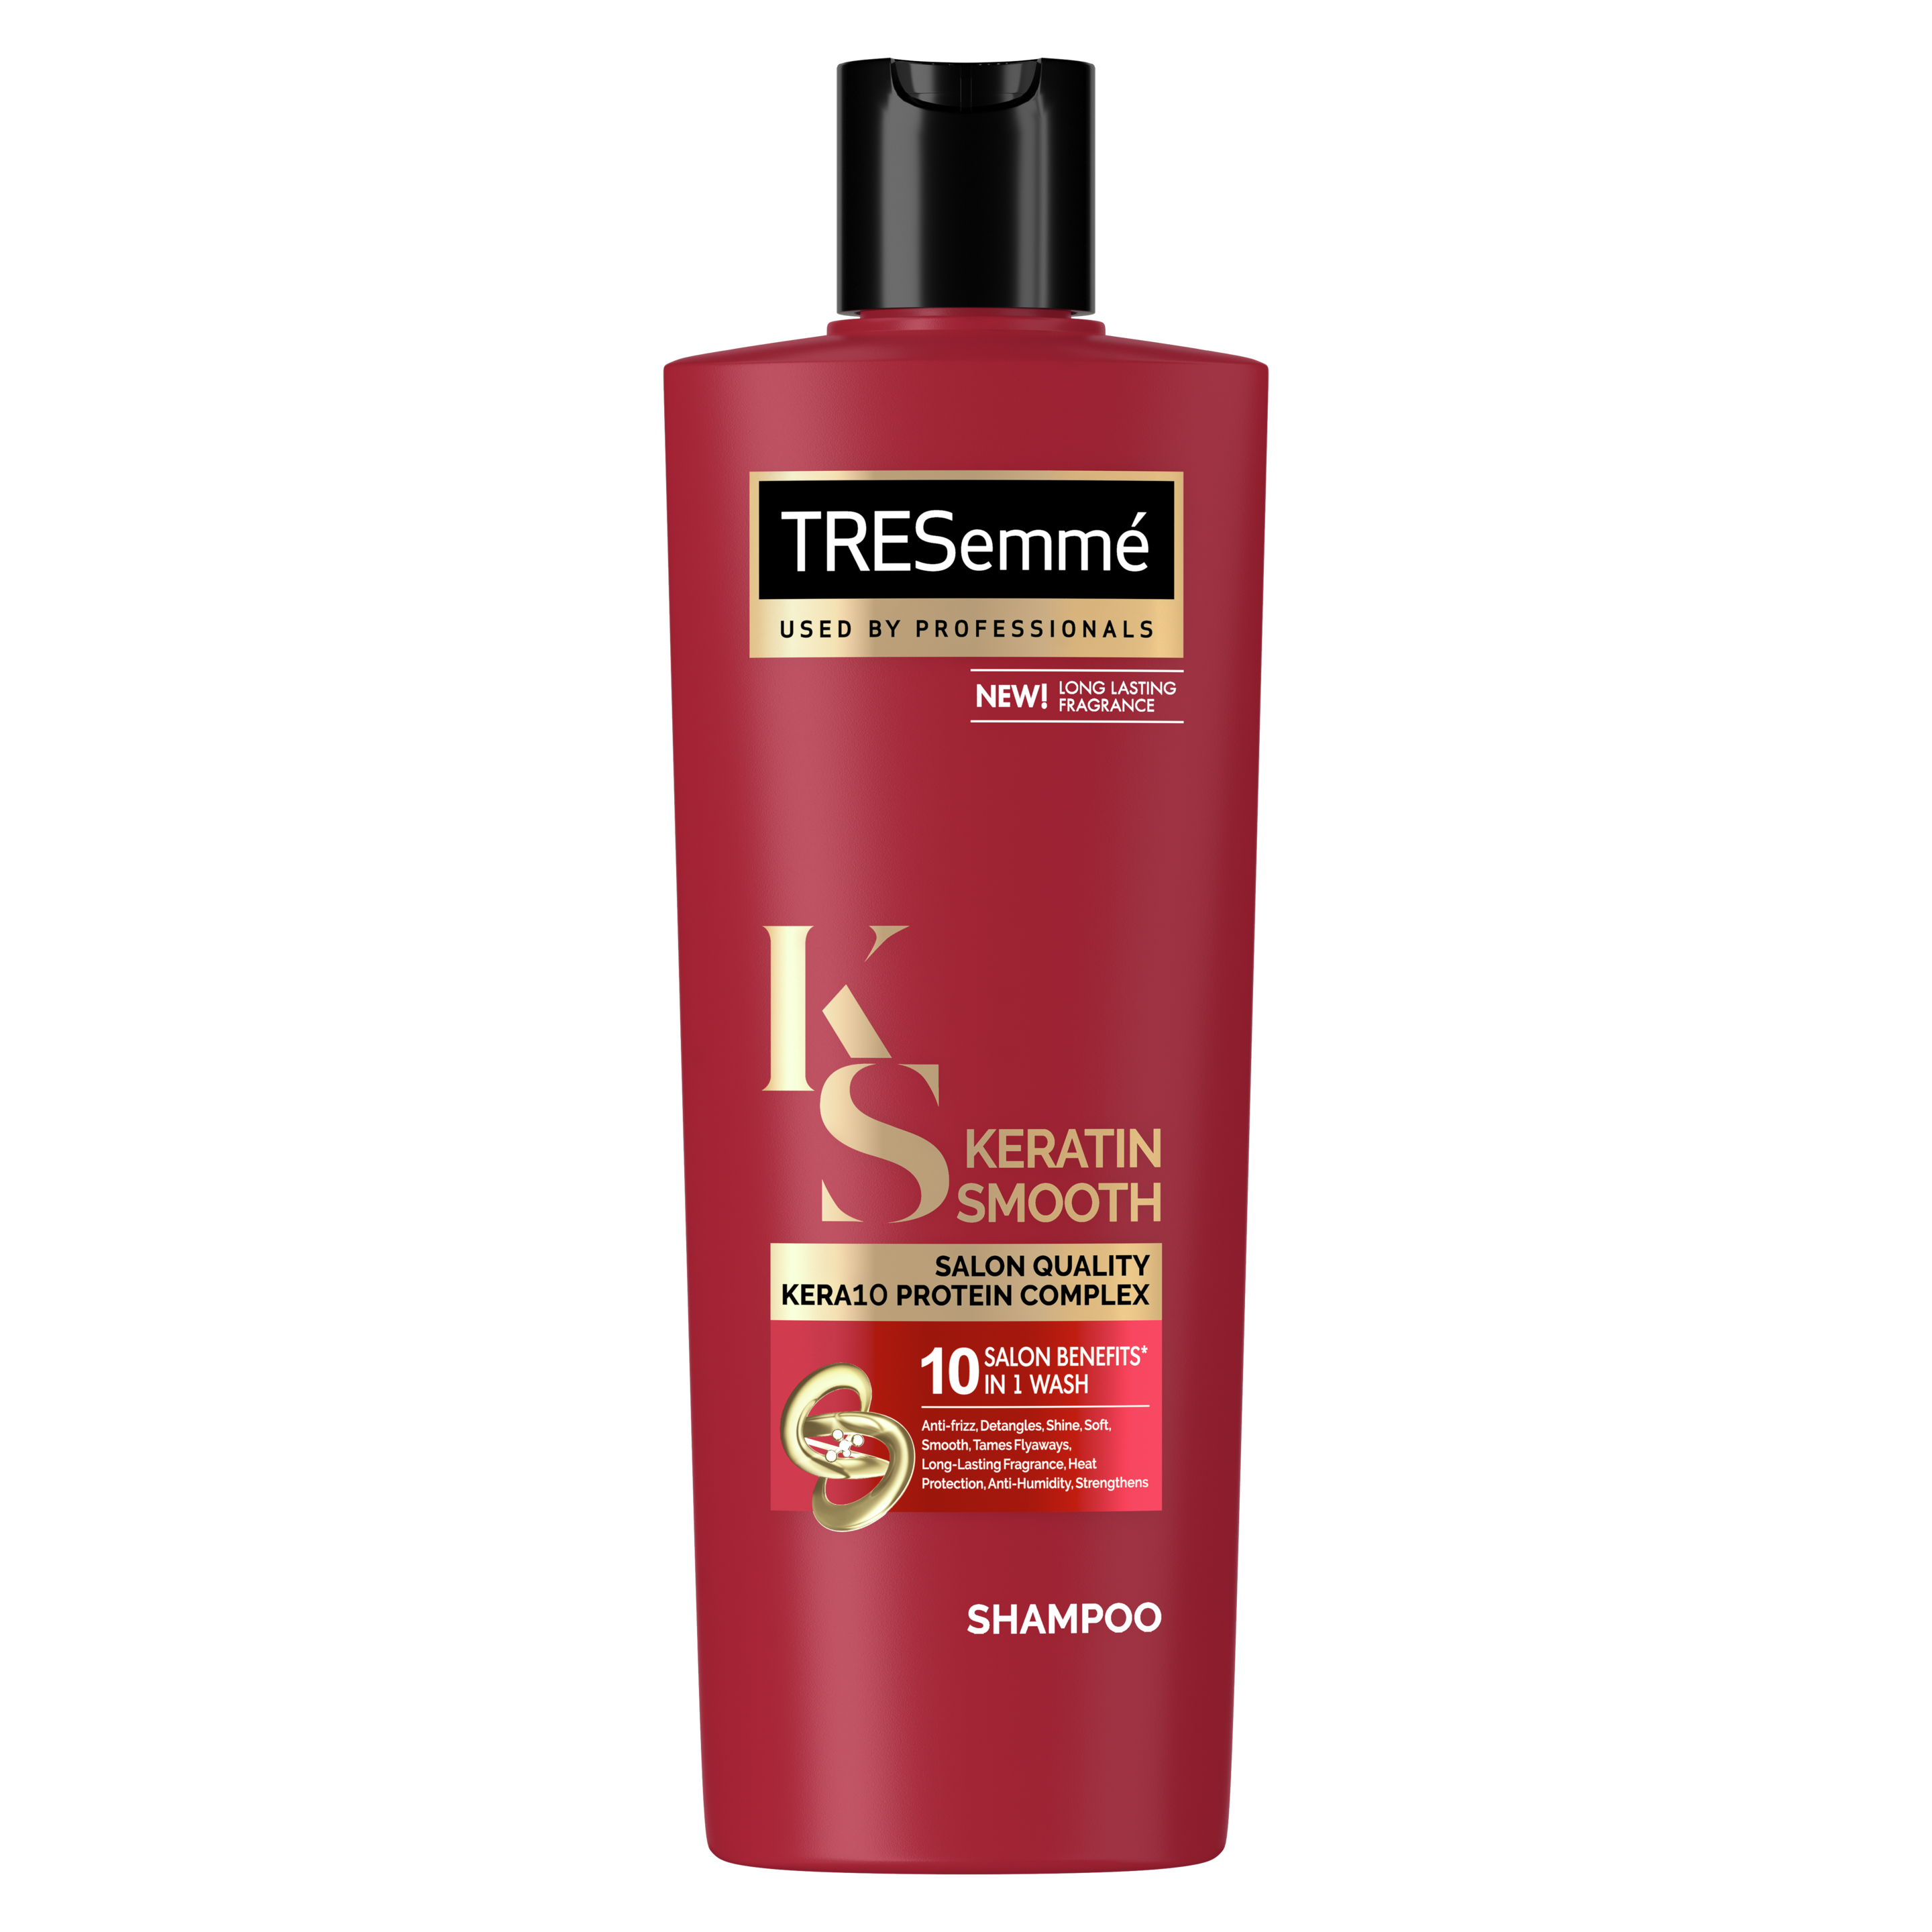 Wash Hair with a Volumizing Shampoo and Conditioner